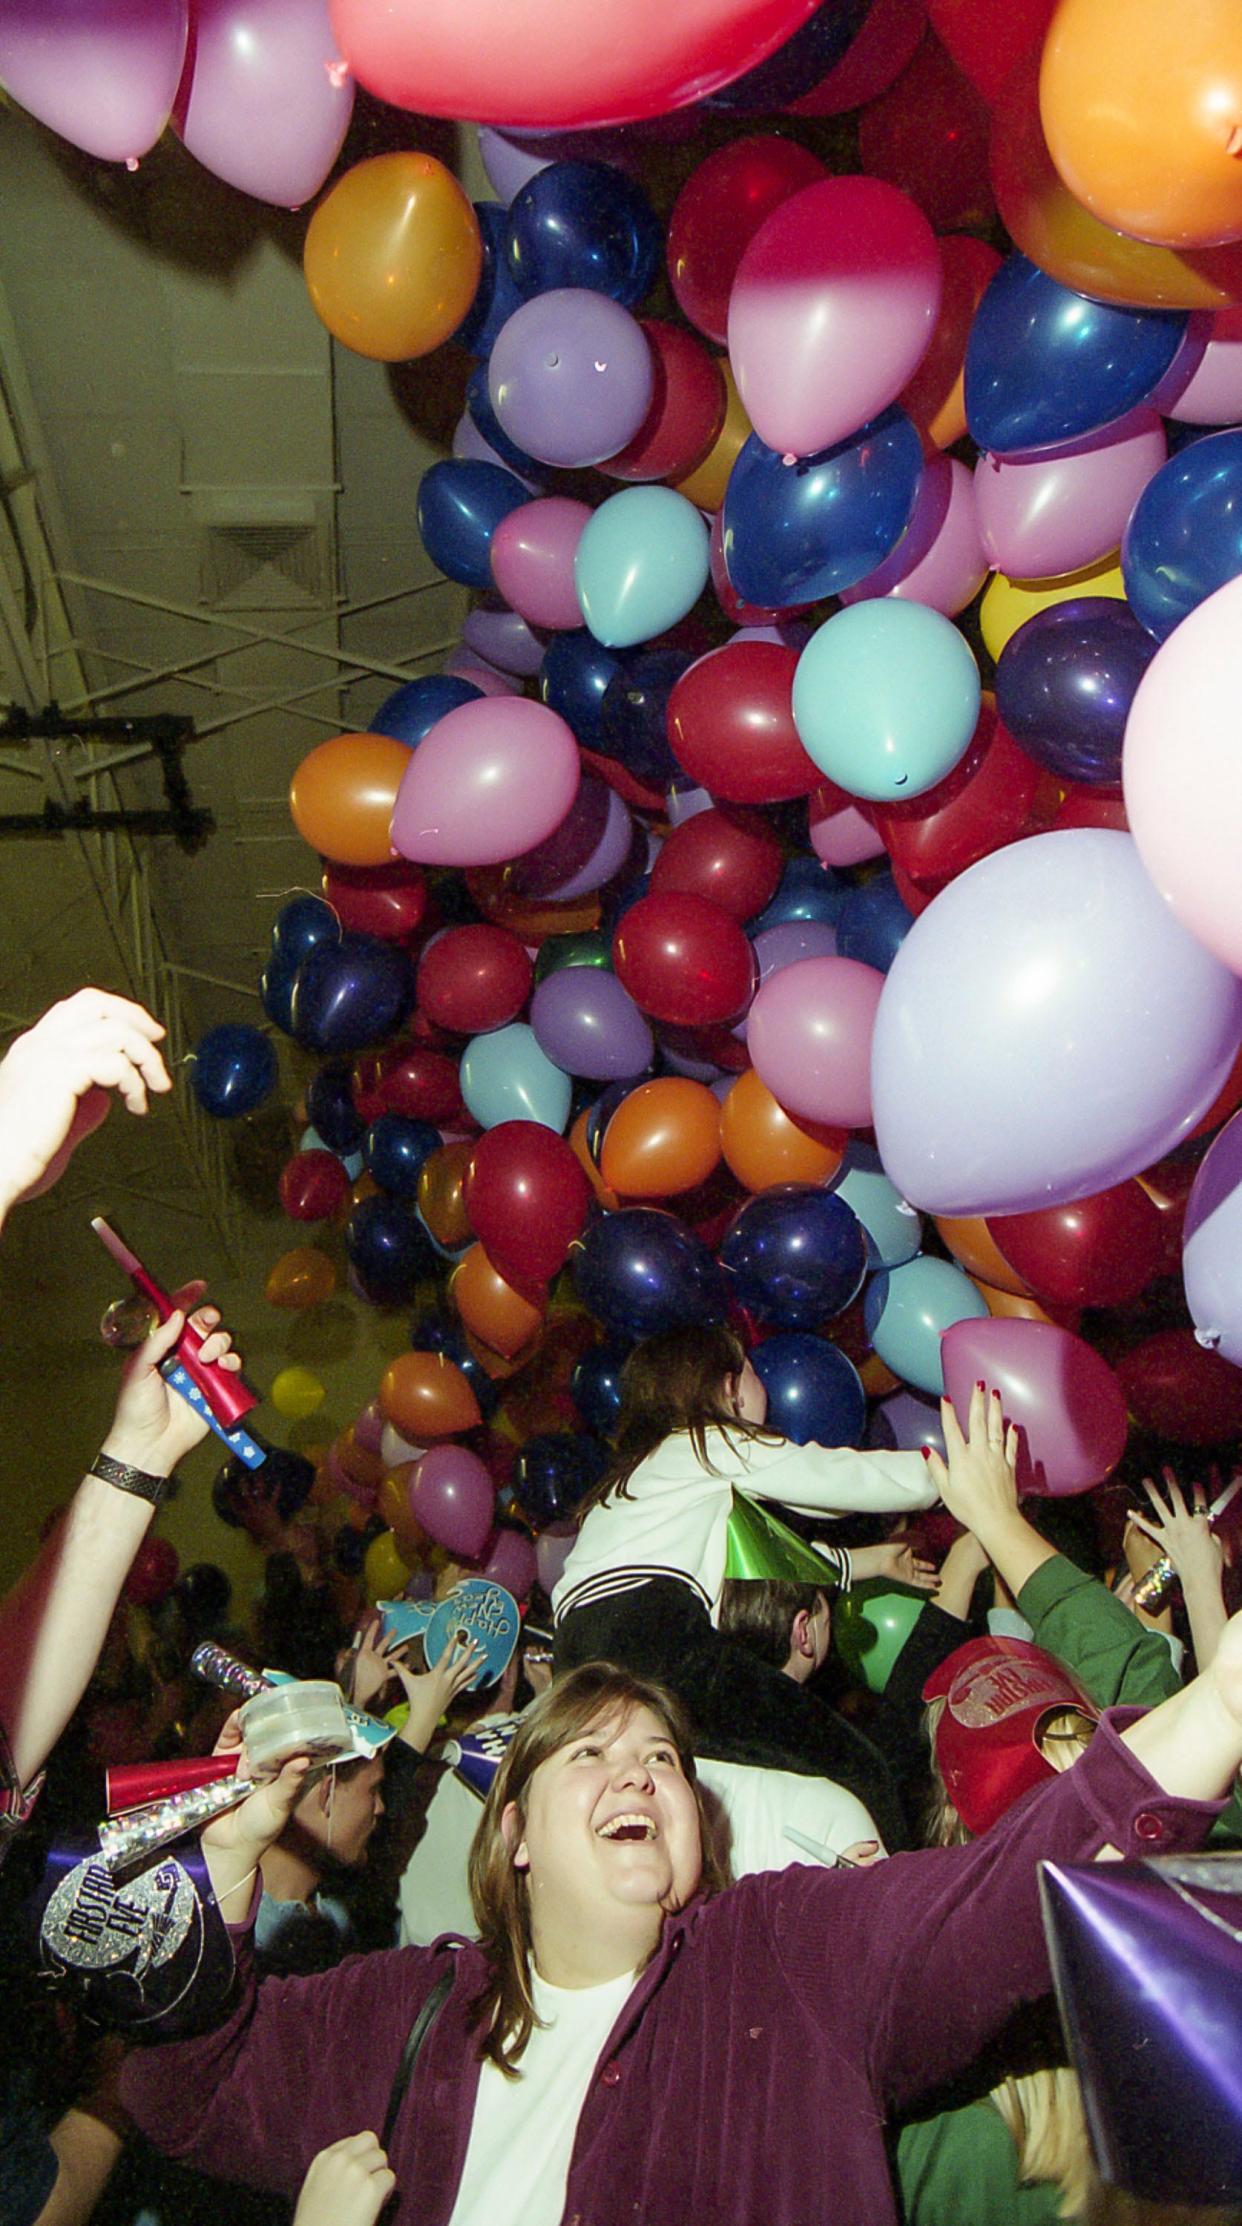 Outstretched arms greet falling balloons at First Star Eve, Saturday, January 1, 2000 at Horace Mann School, in Sheboygan, Wis.